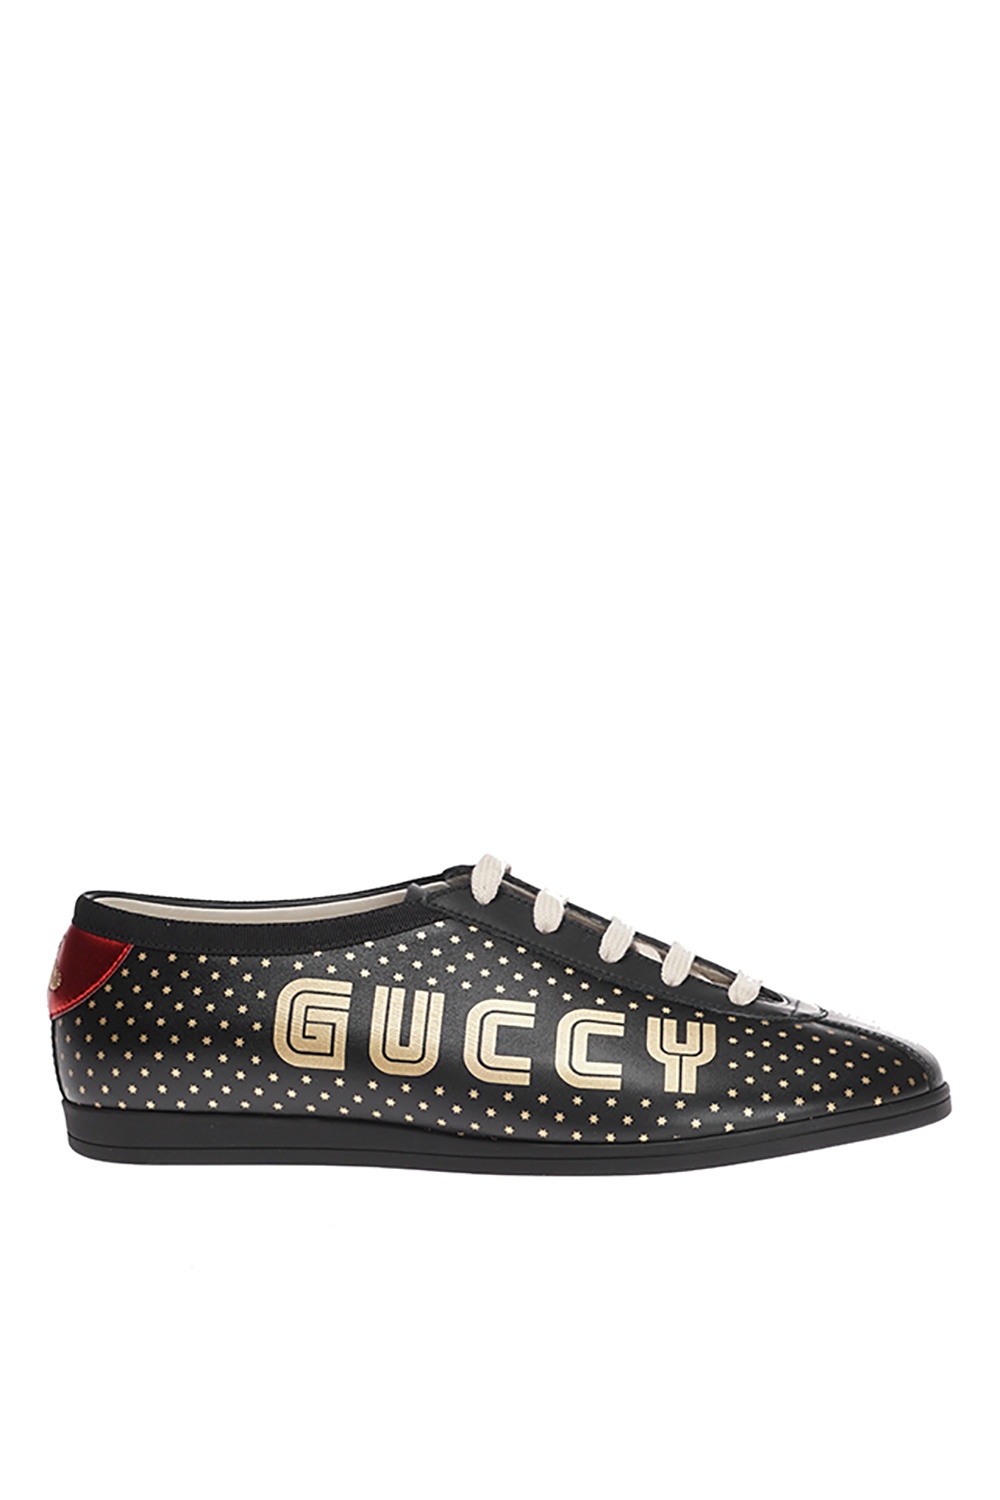 Guccy Falacer' sneakers Gucci - Vitkac 